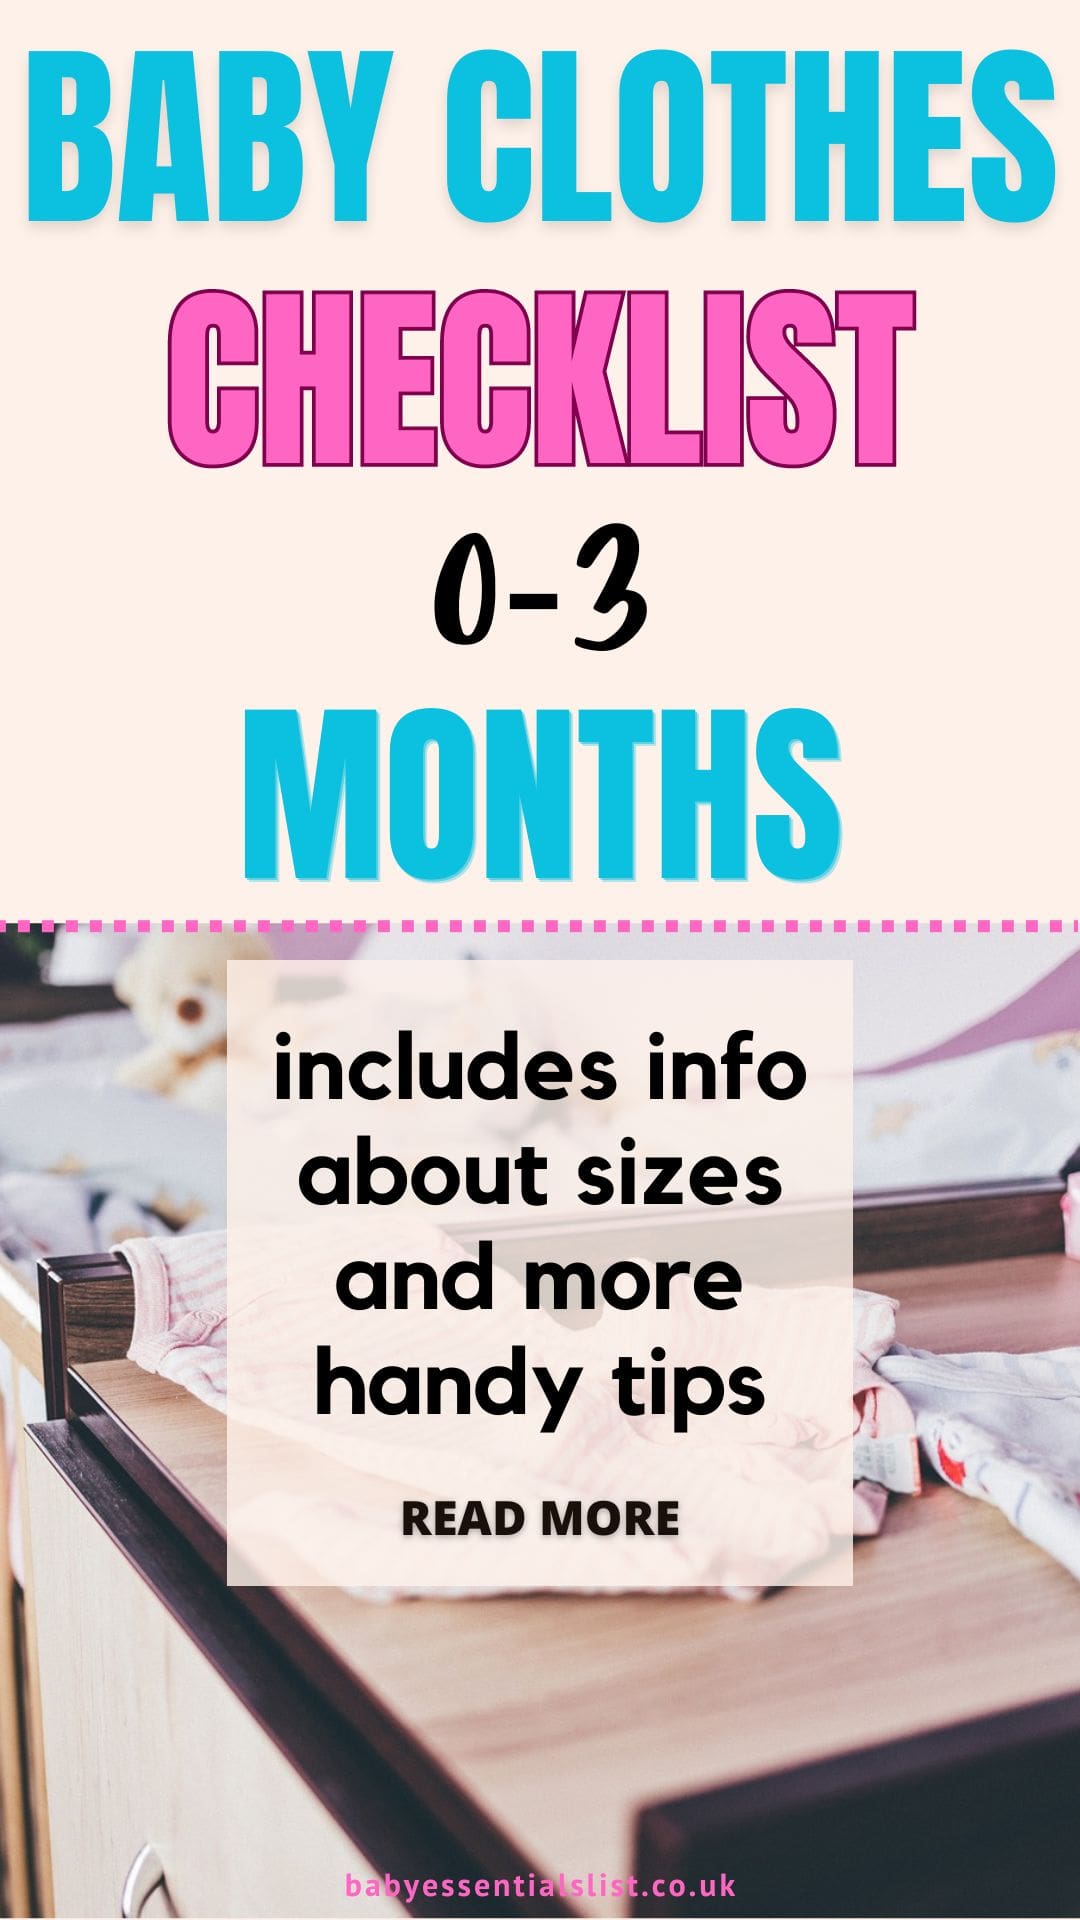 Baby clothes checklist 0-3 months info about sizes and more tips